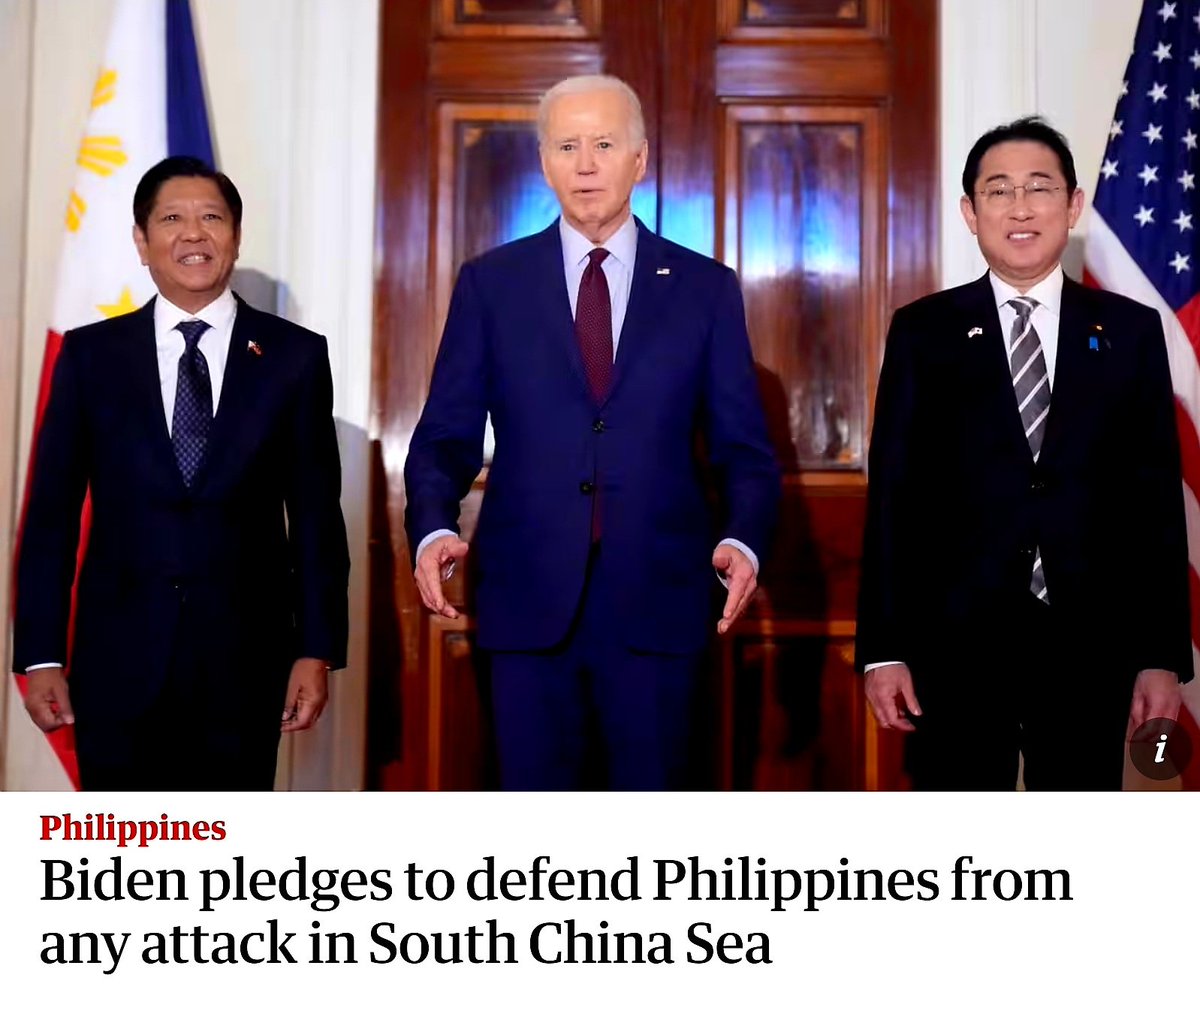 ... while continuously provoking China to attack the Philippines in the South China Sea. And Taiwan in the Taiwan Strait, Ukraine in Europe, etc, etc. The American way of war, 21st century.